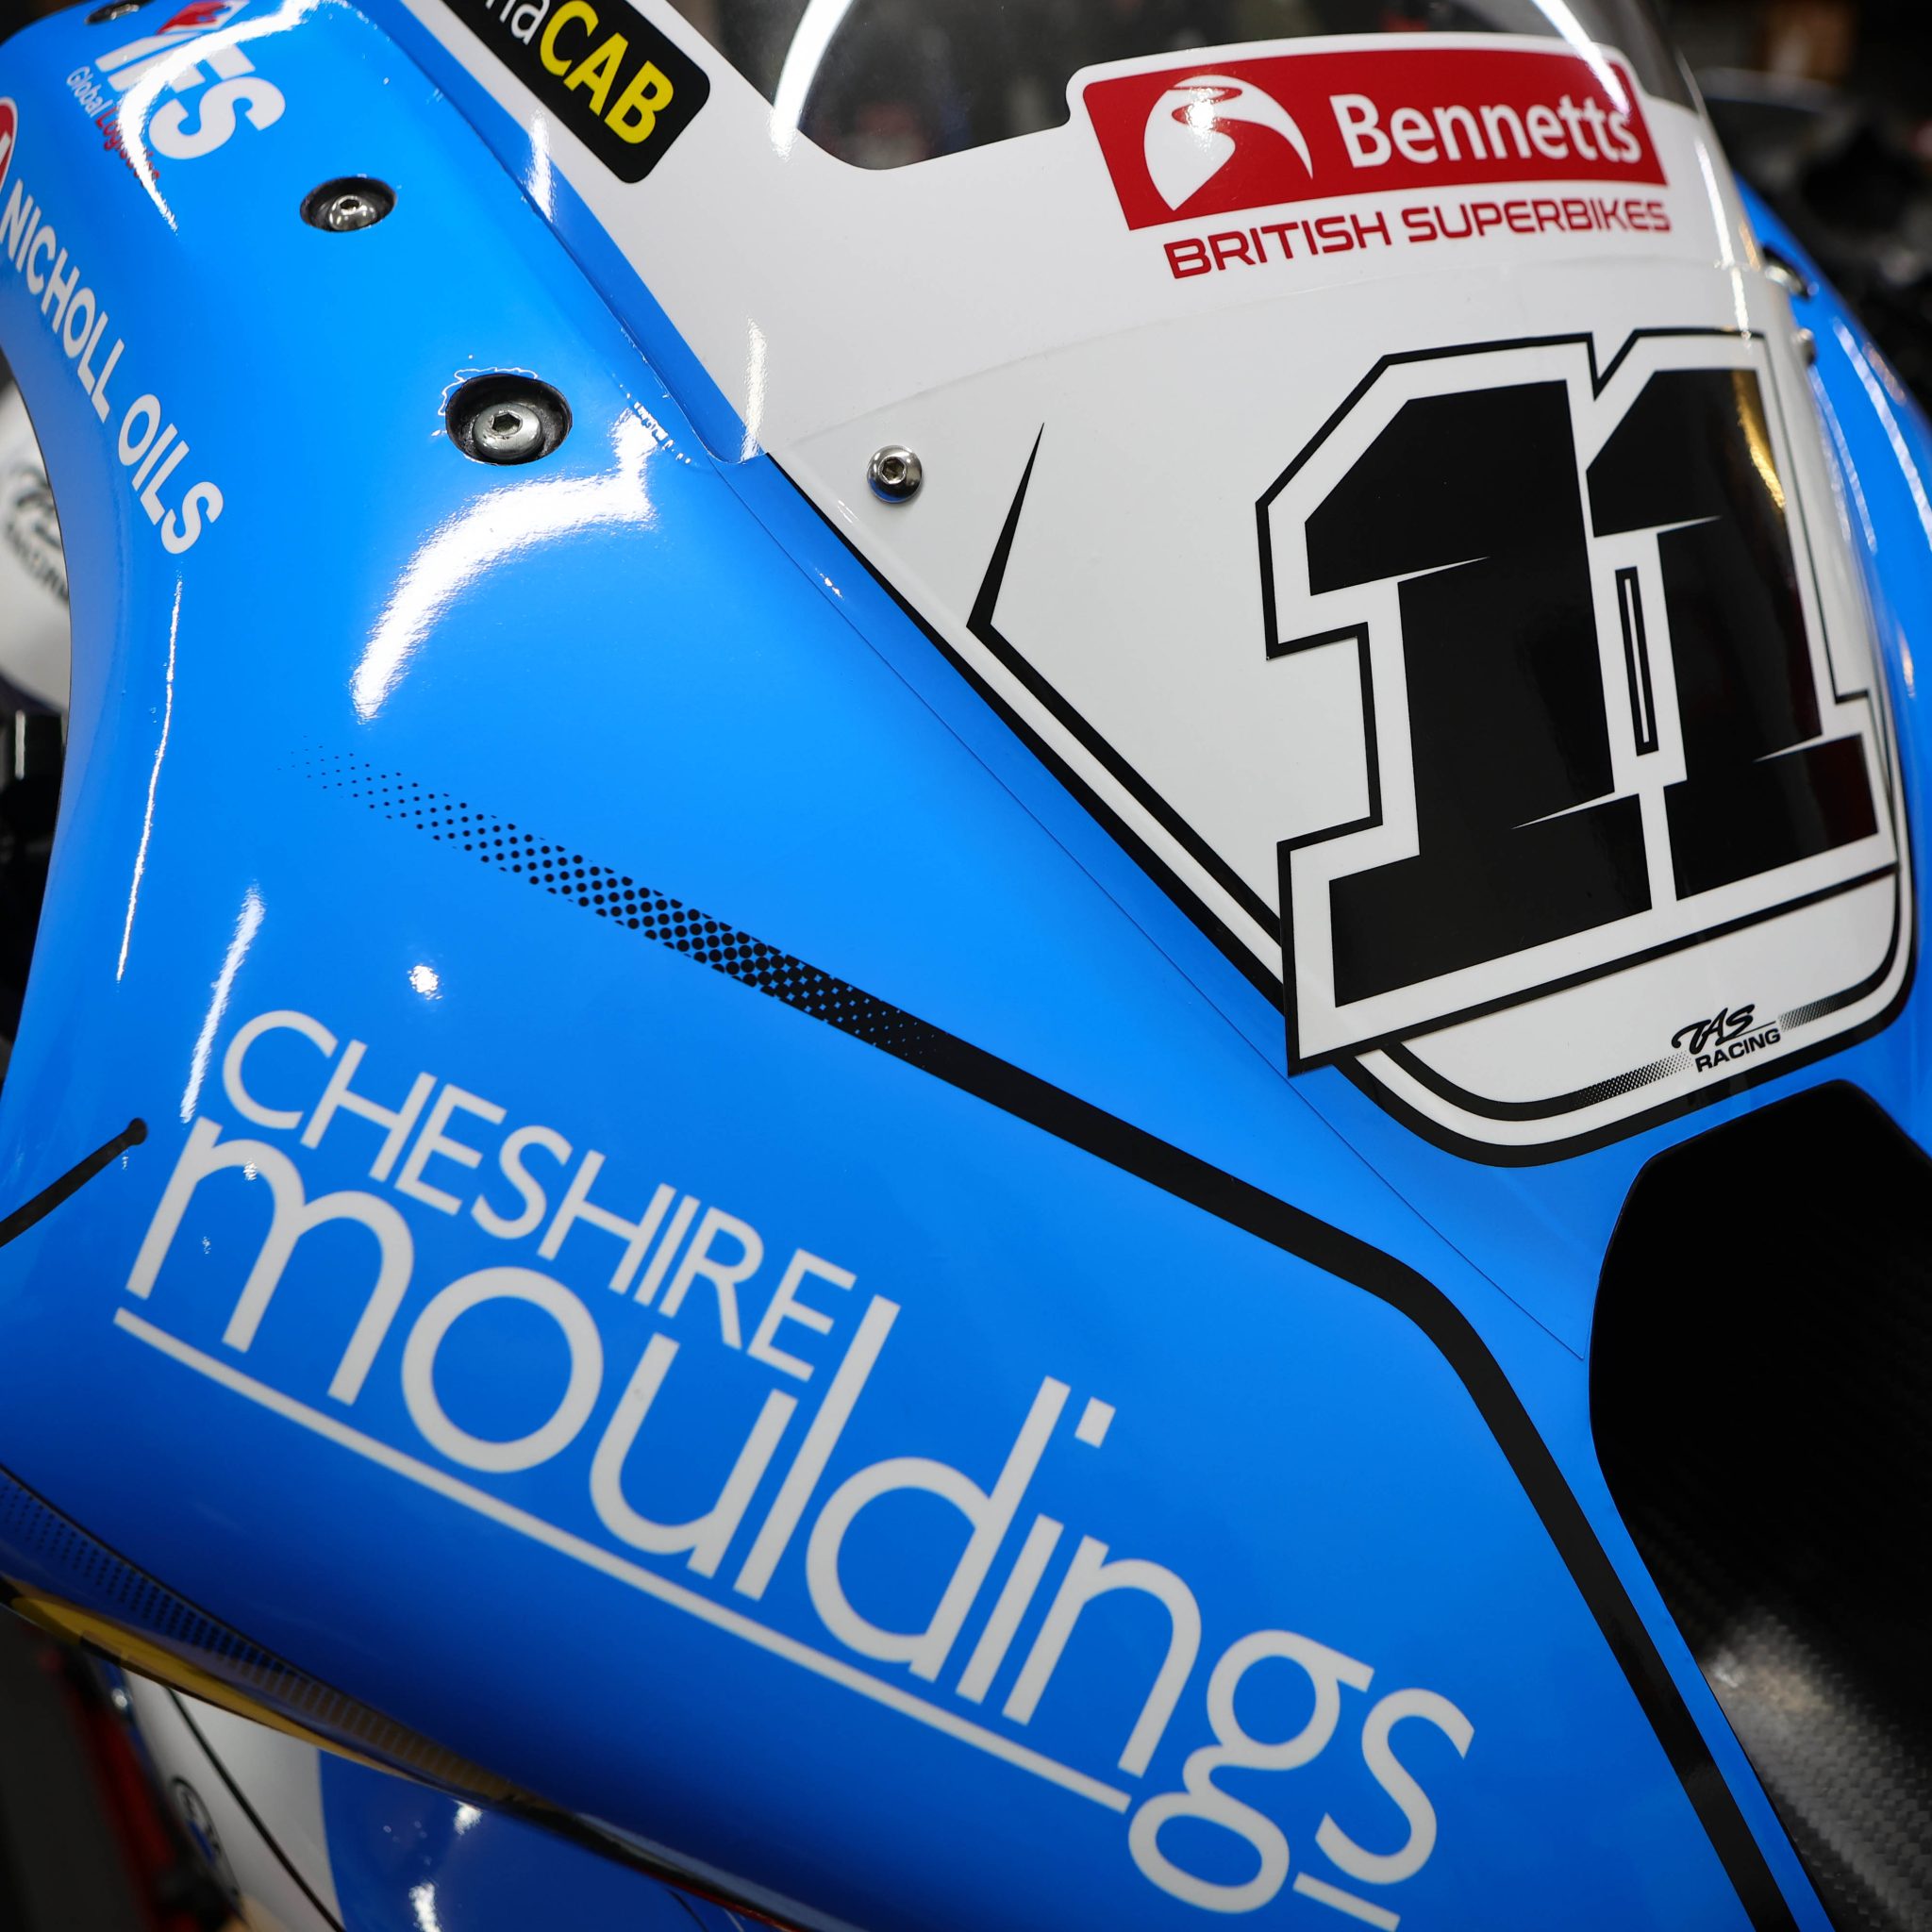 Cheshire Mouldings British Superbikes Cheshire Mouldings